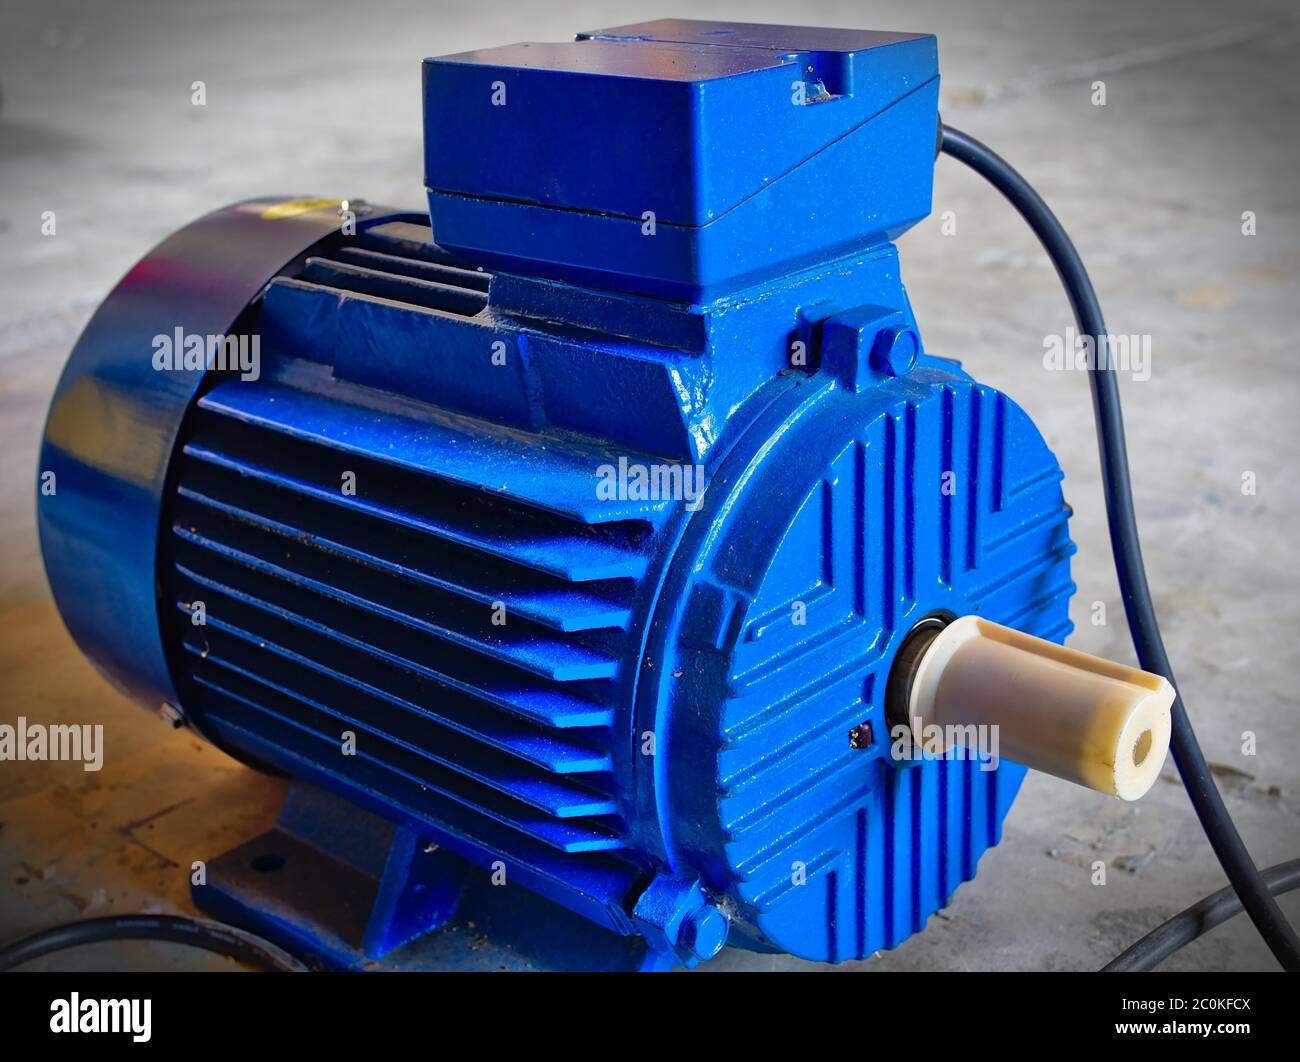 An exhaust fan motor without impeller blade Stock Photo